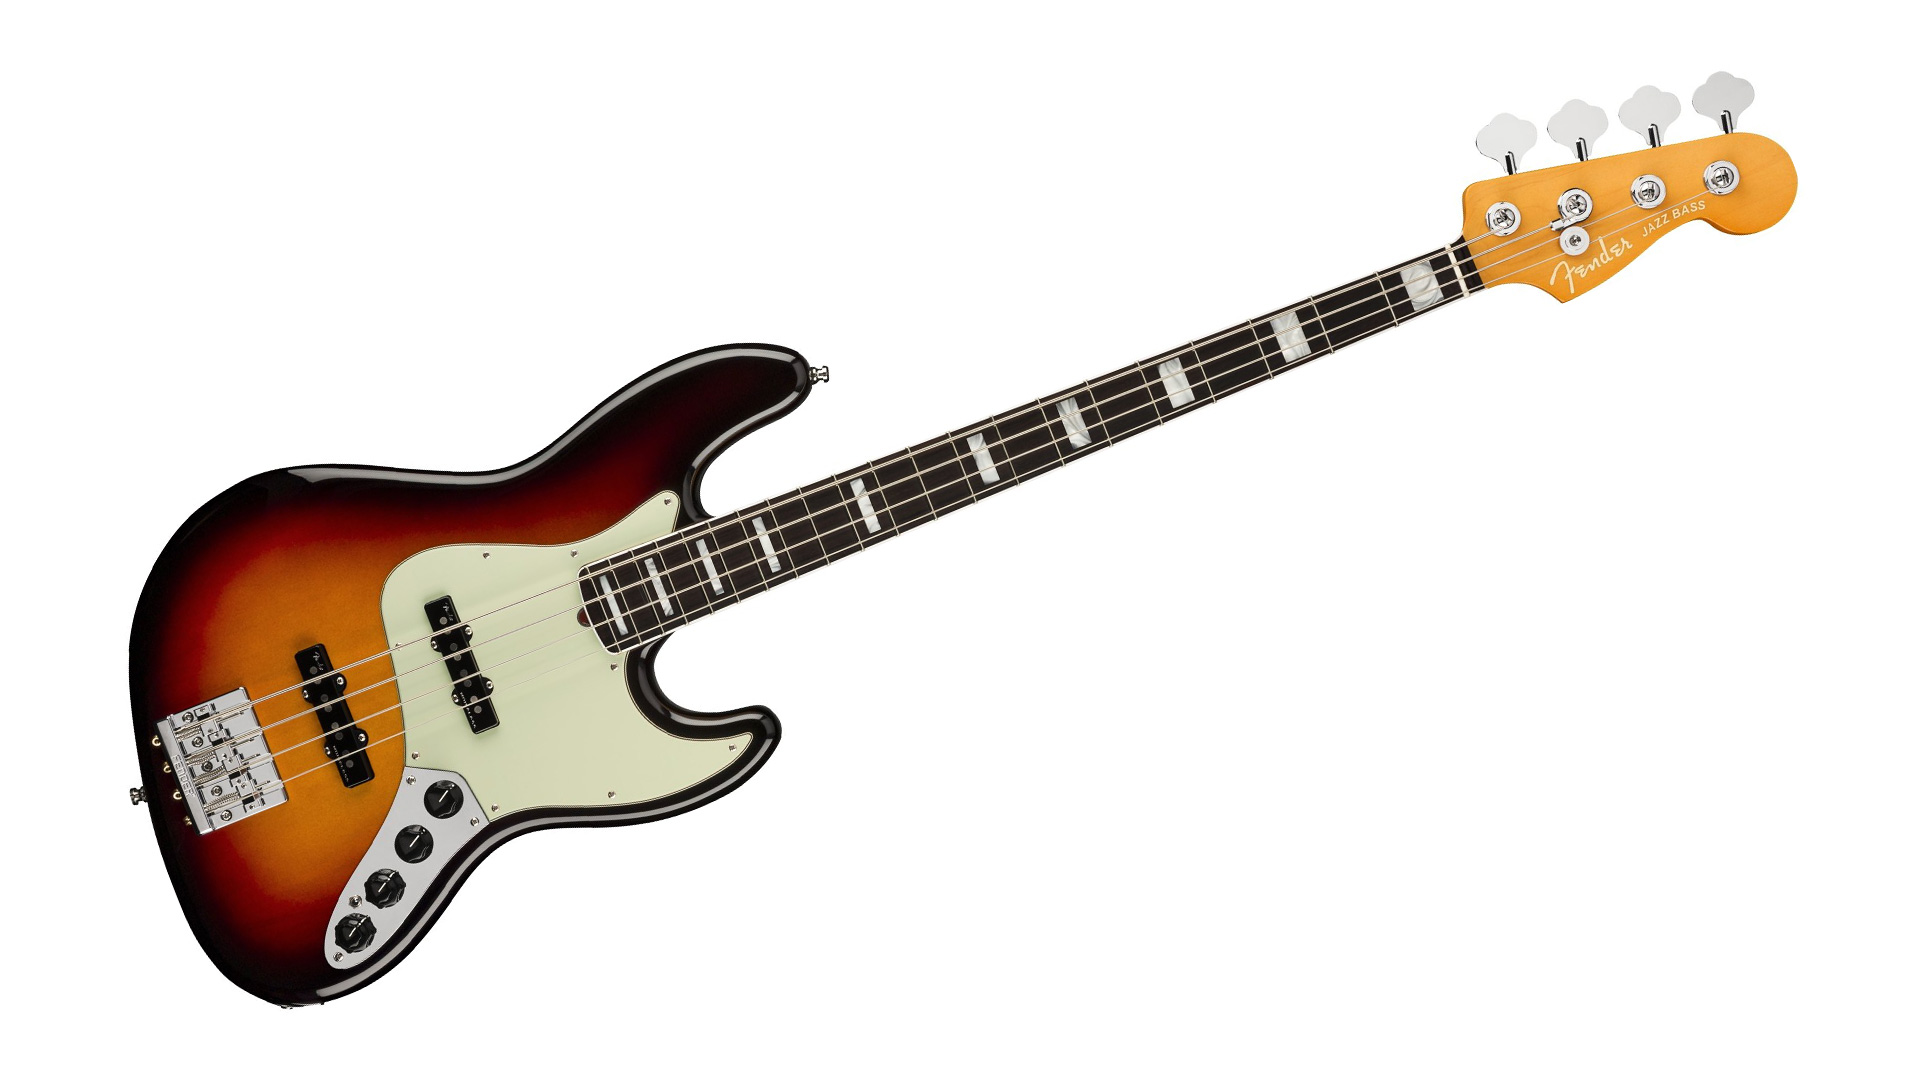 Fender’s 4-string bass guitars are the most recognizable kind of bass across genres and eras.